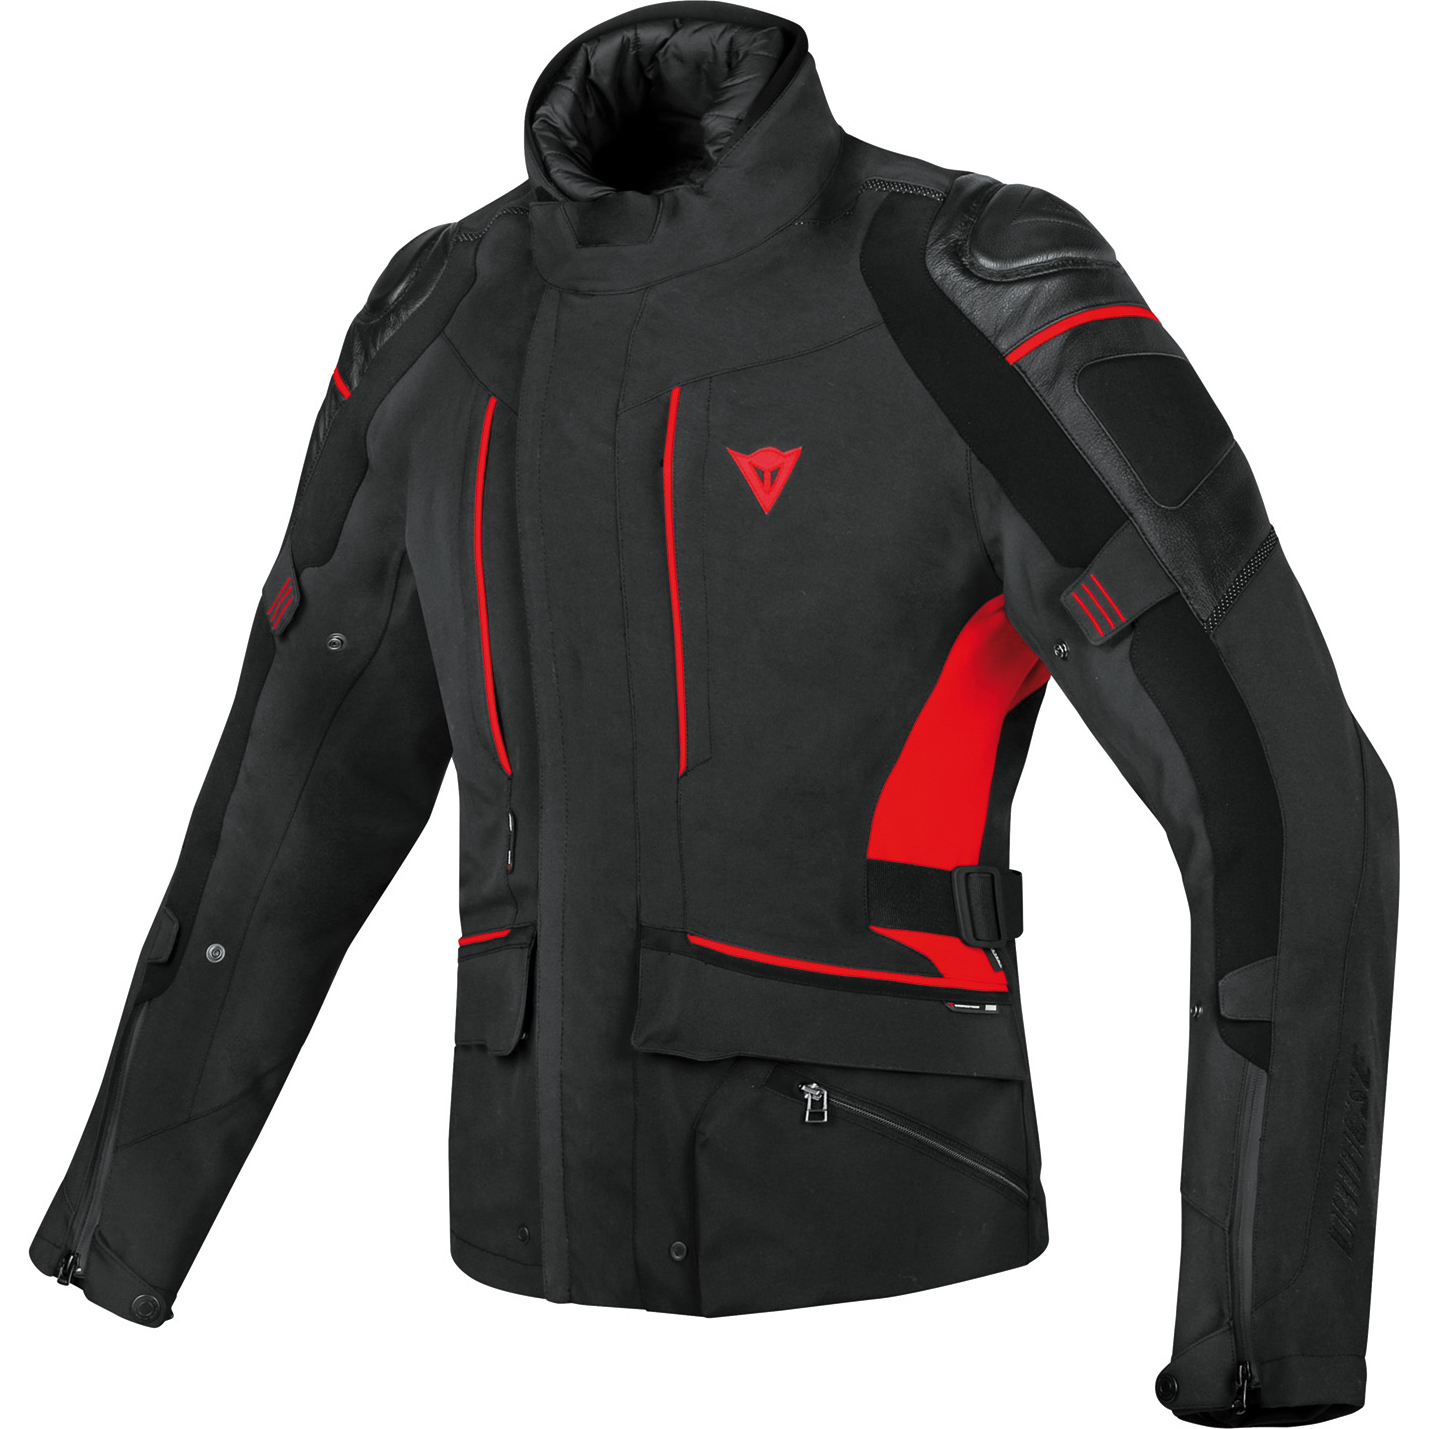 NEW!! The Dainese D-Cyclone Gore-Tex Motorcycle Jacket!